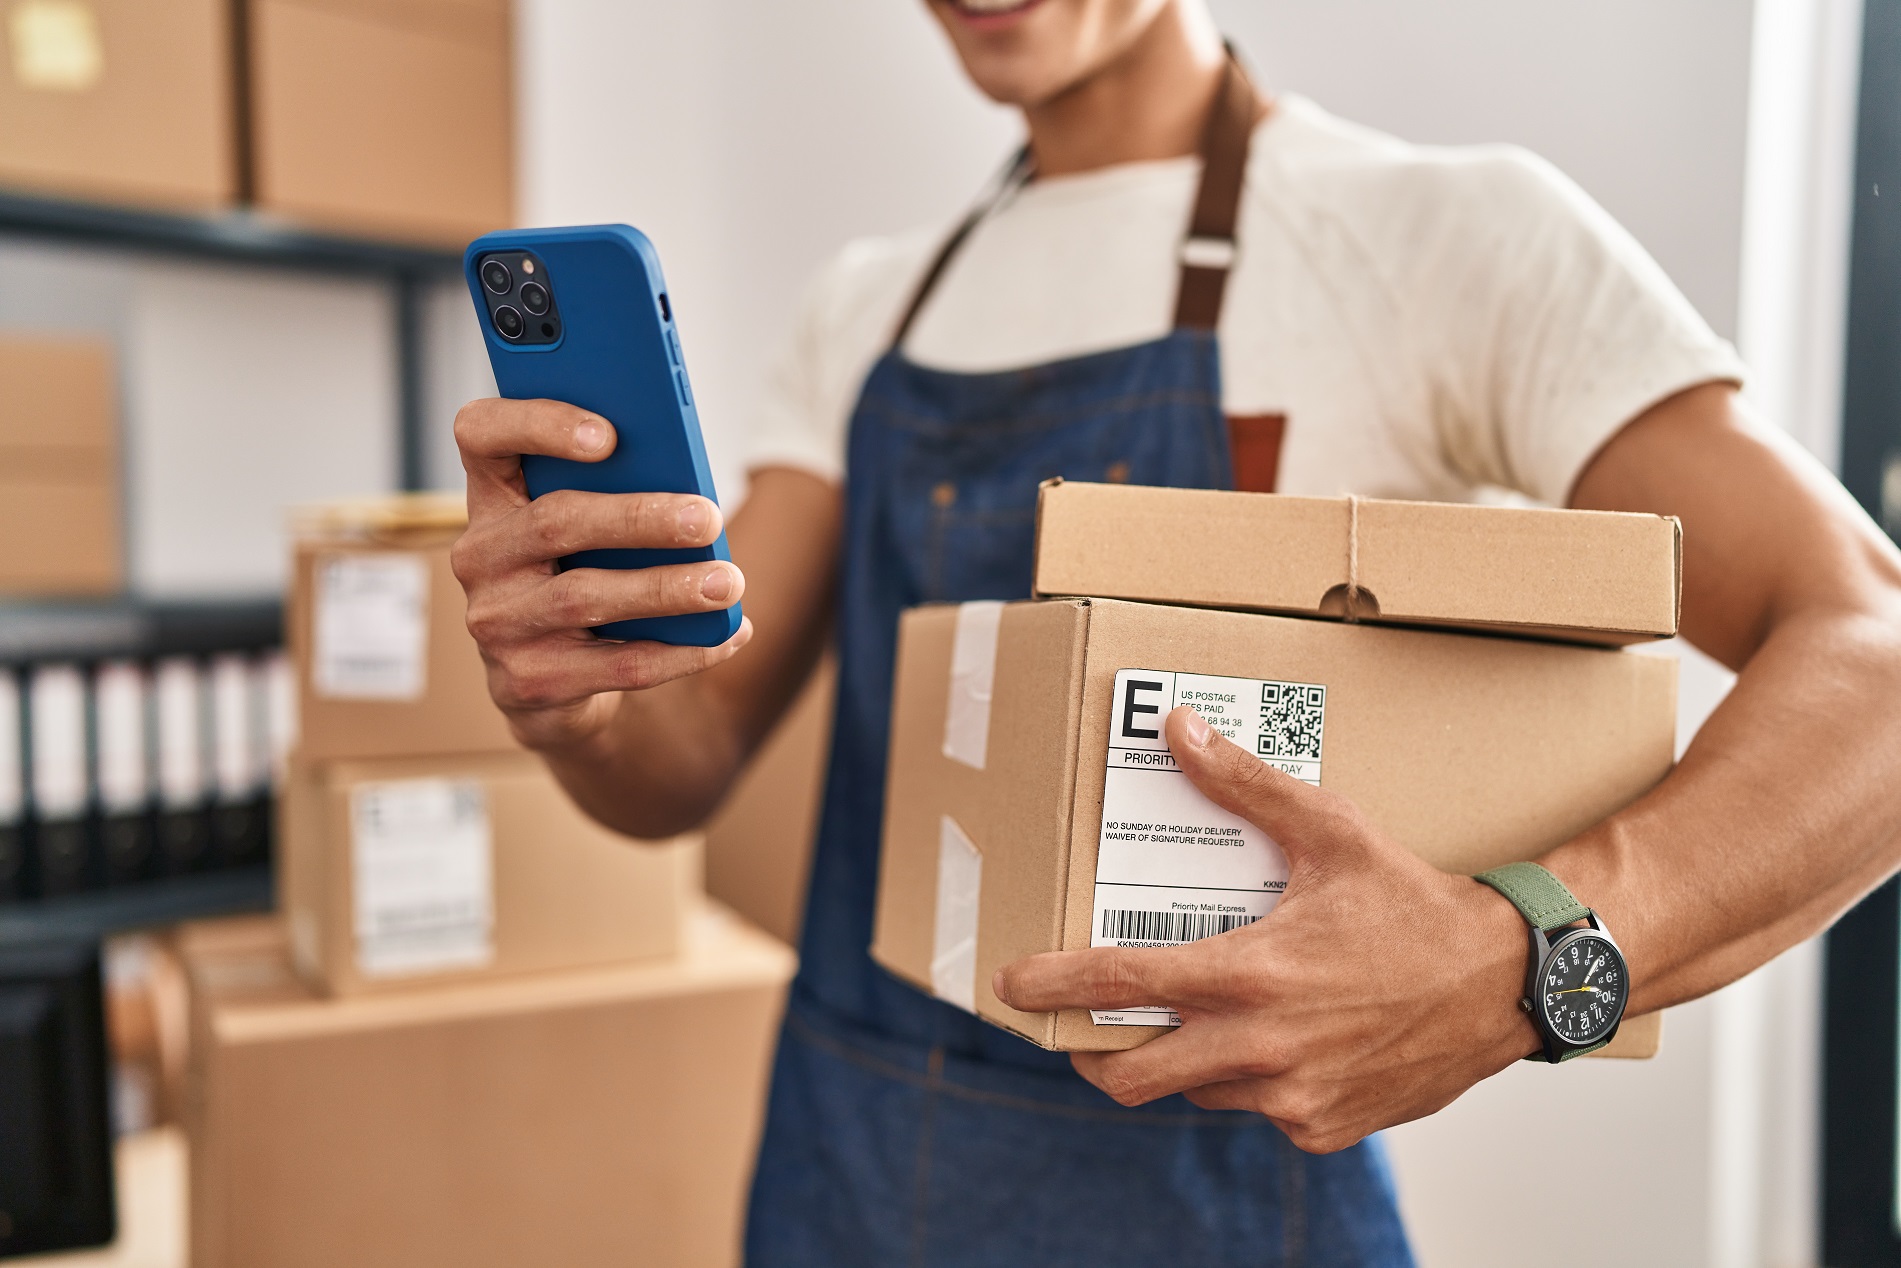 Young hispanic man ecommerce business worker holding packages and using smartphone at office